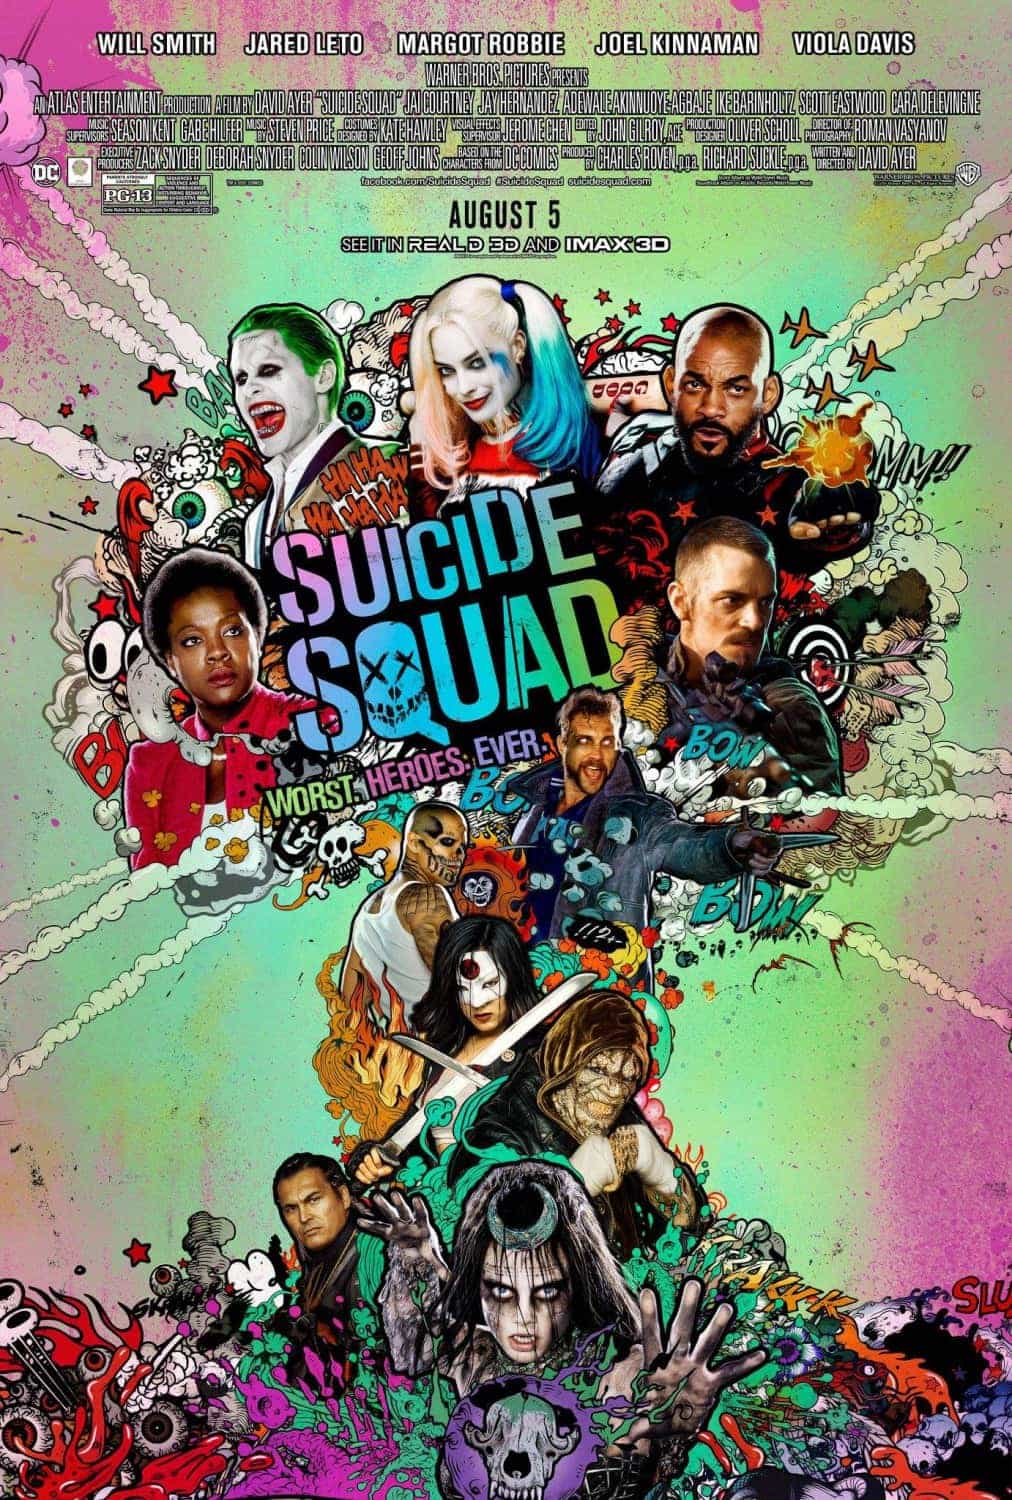 New trailer for Suicide Squad - released 5th August